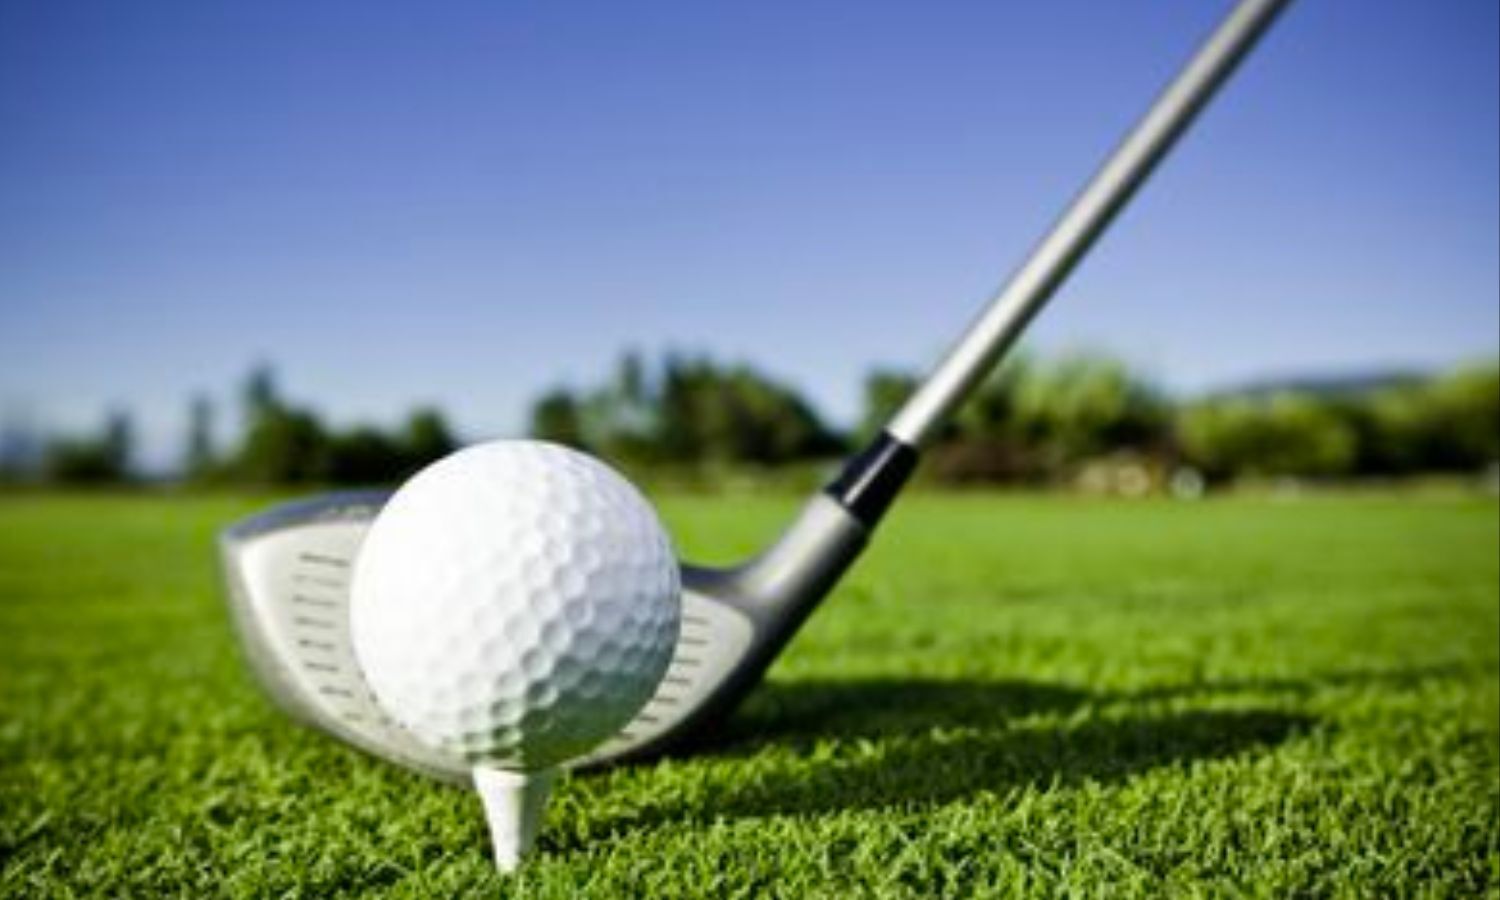 Indian Golf Union launches new initiatives to propel Golfing growth in India